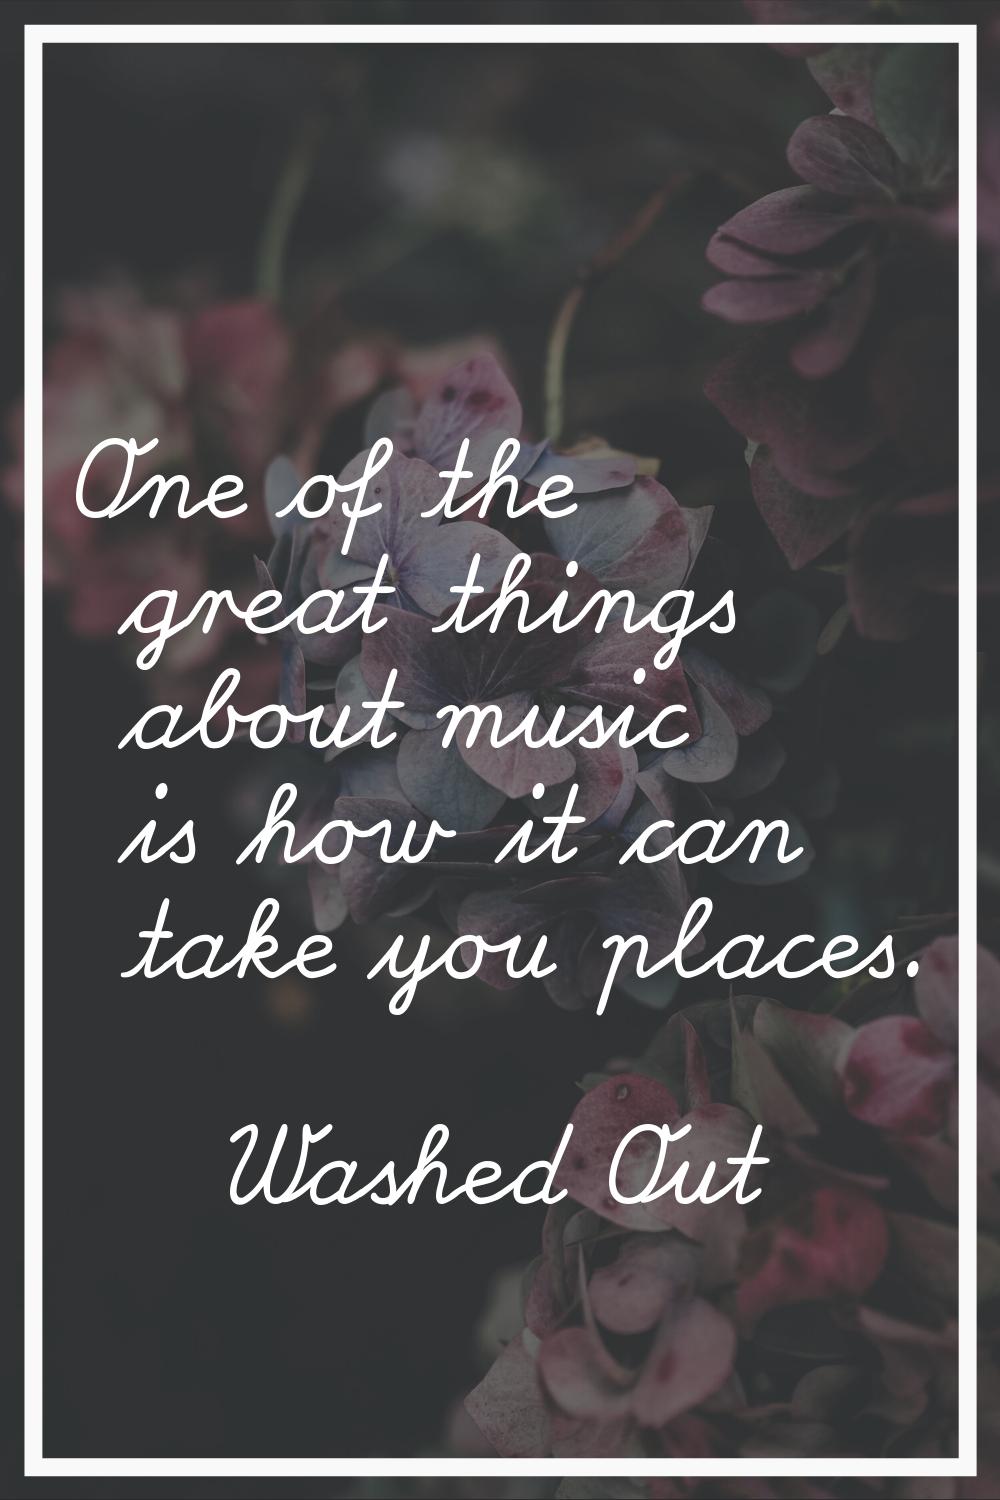 One of the great things about music is how it can take you places.